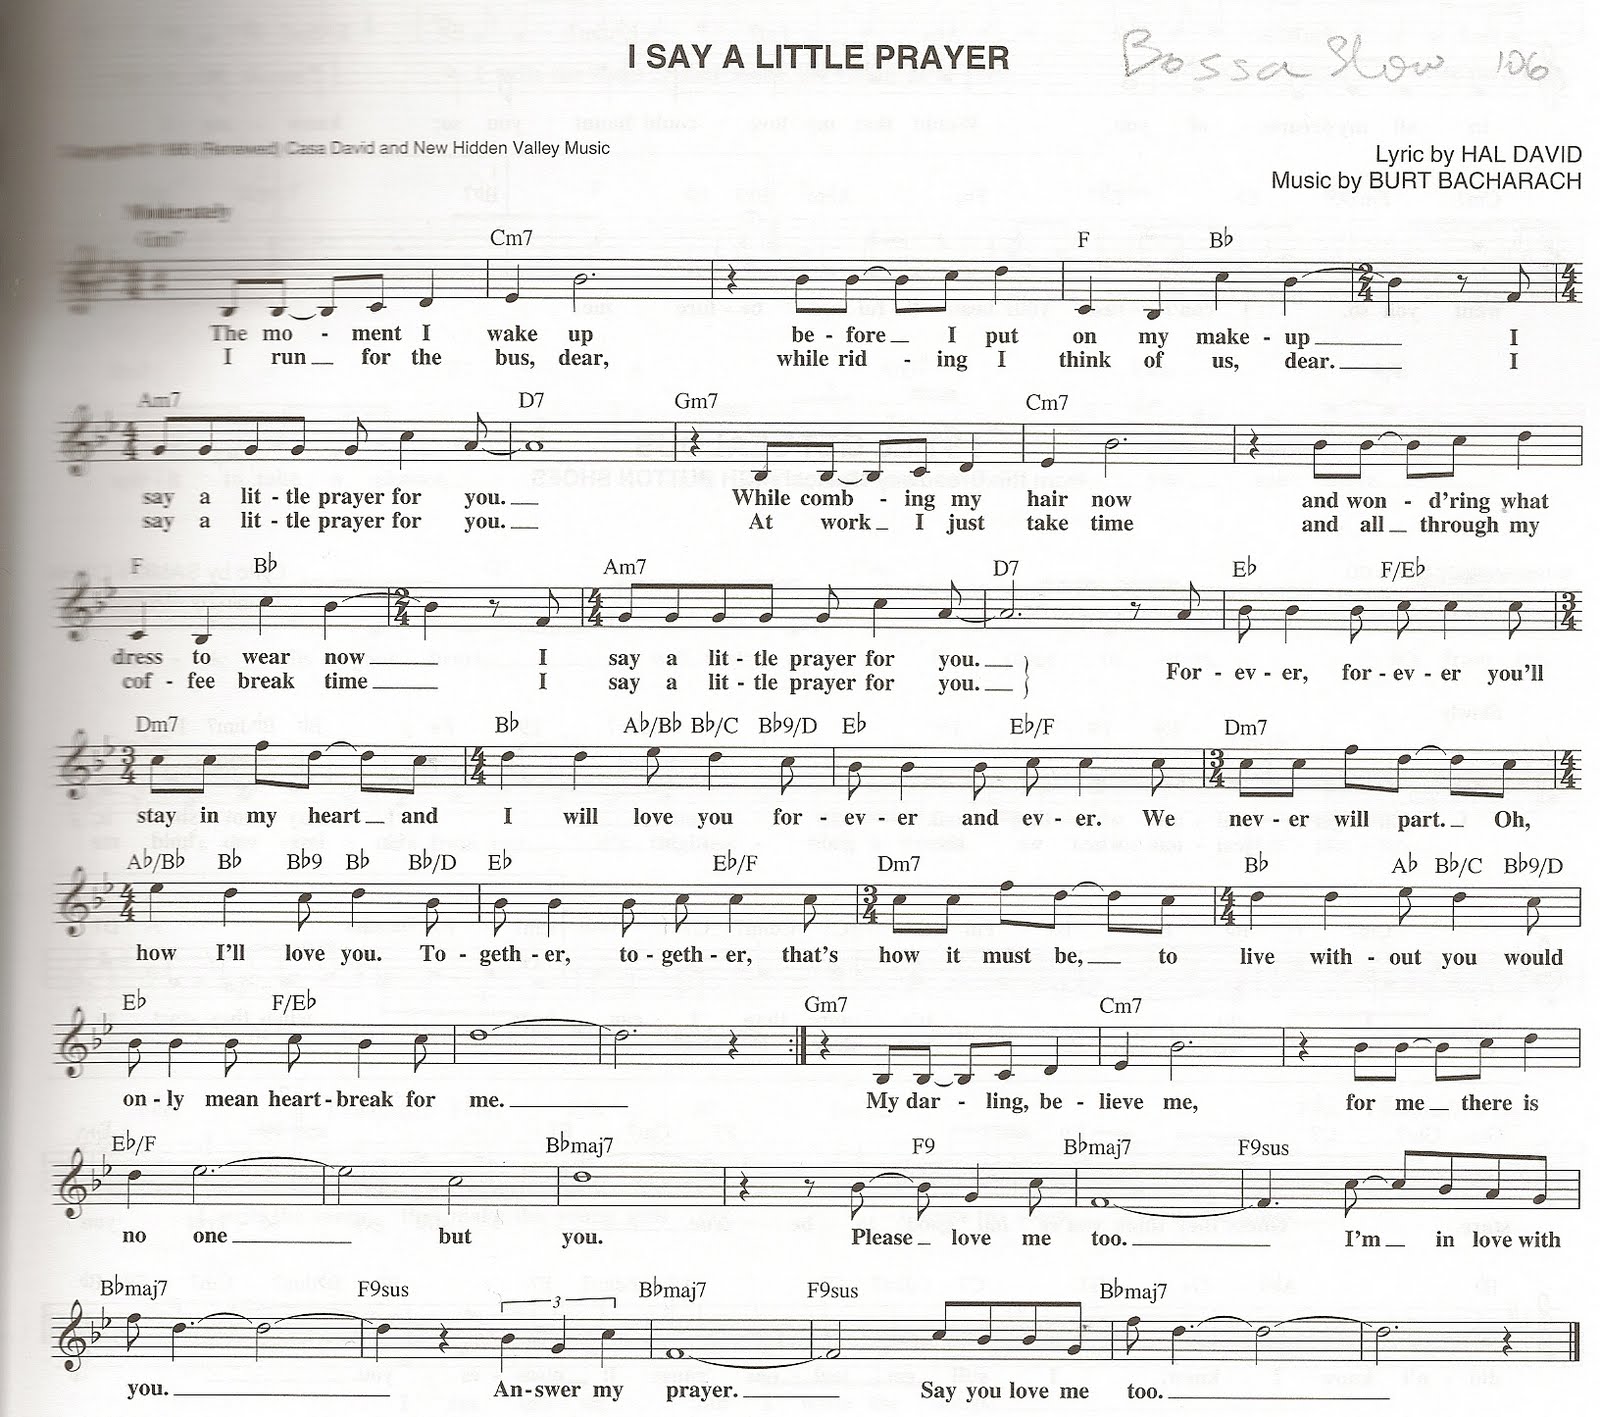 Music: I say a little prayer for you